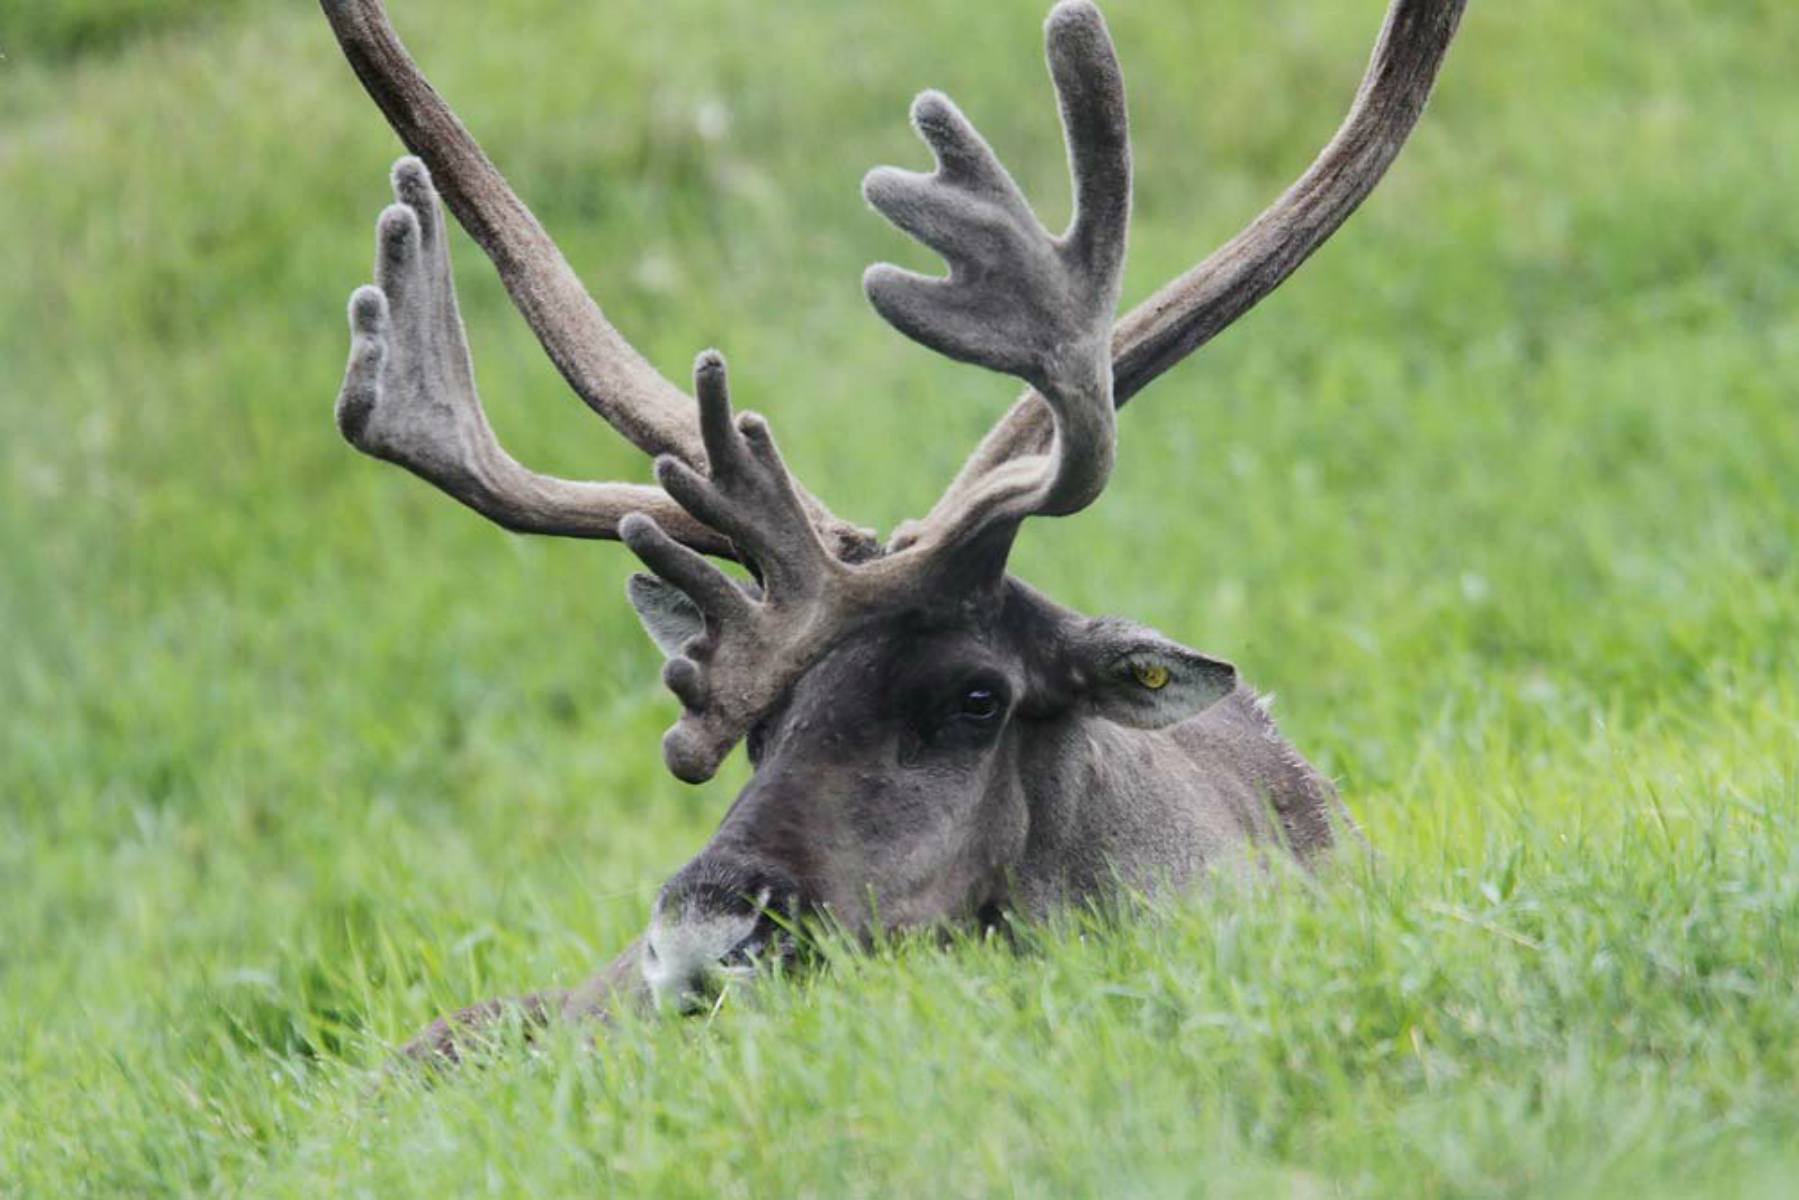 Alberta is home to two of Canada's imperilled caribou populations